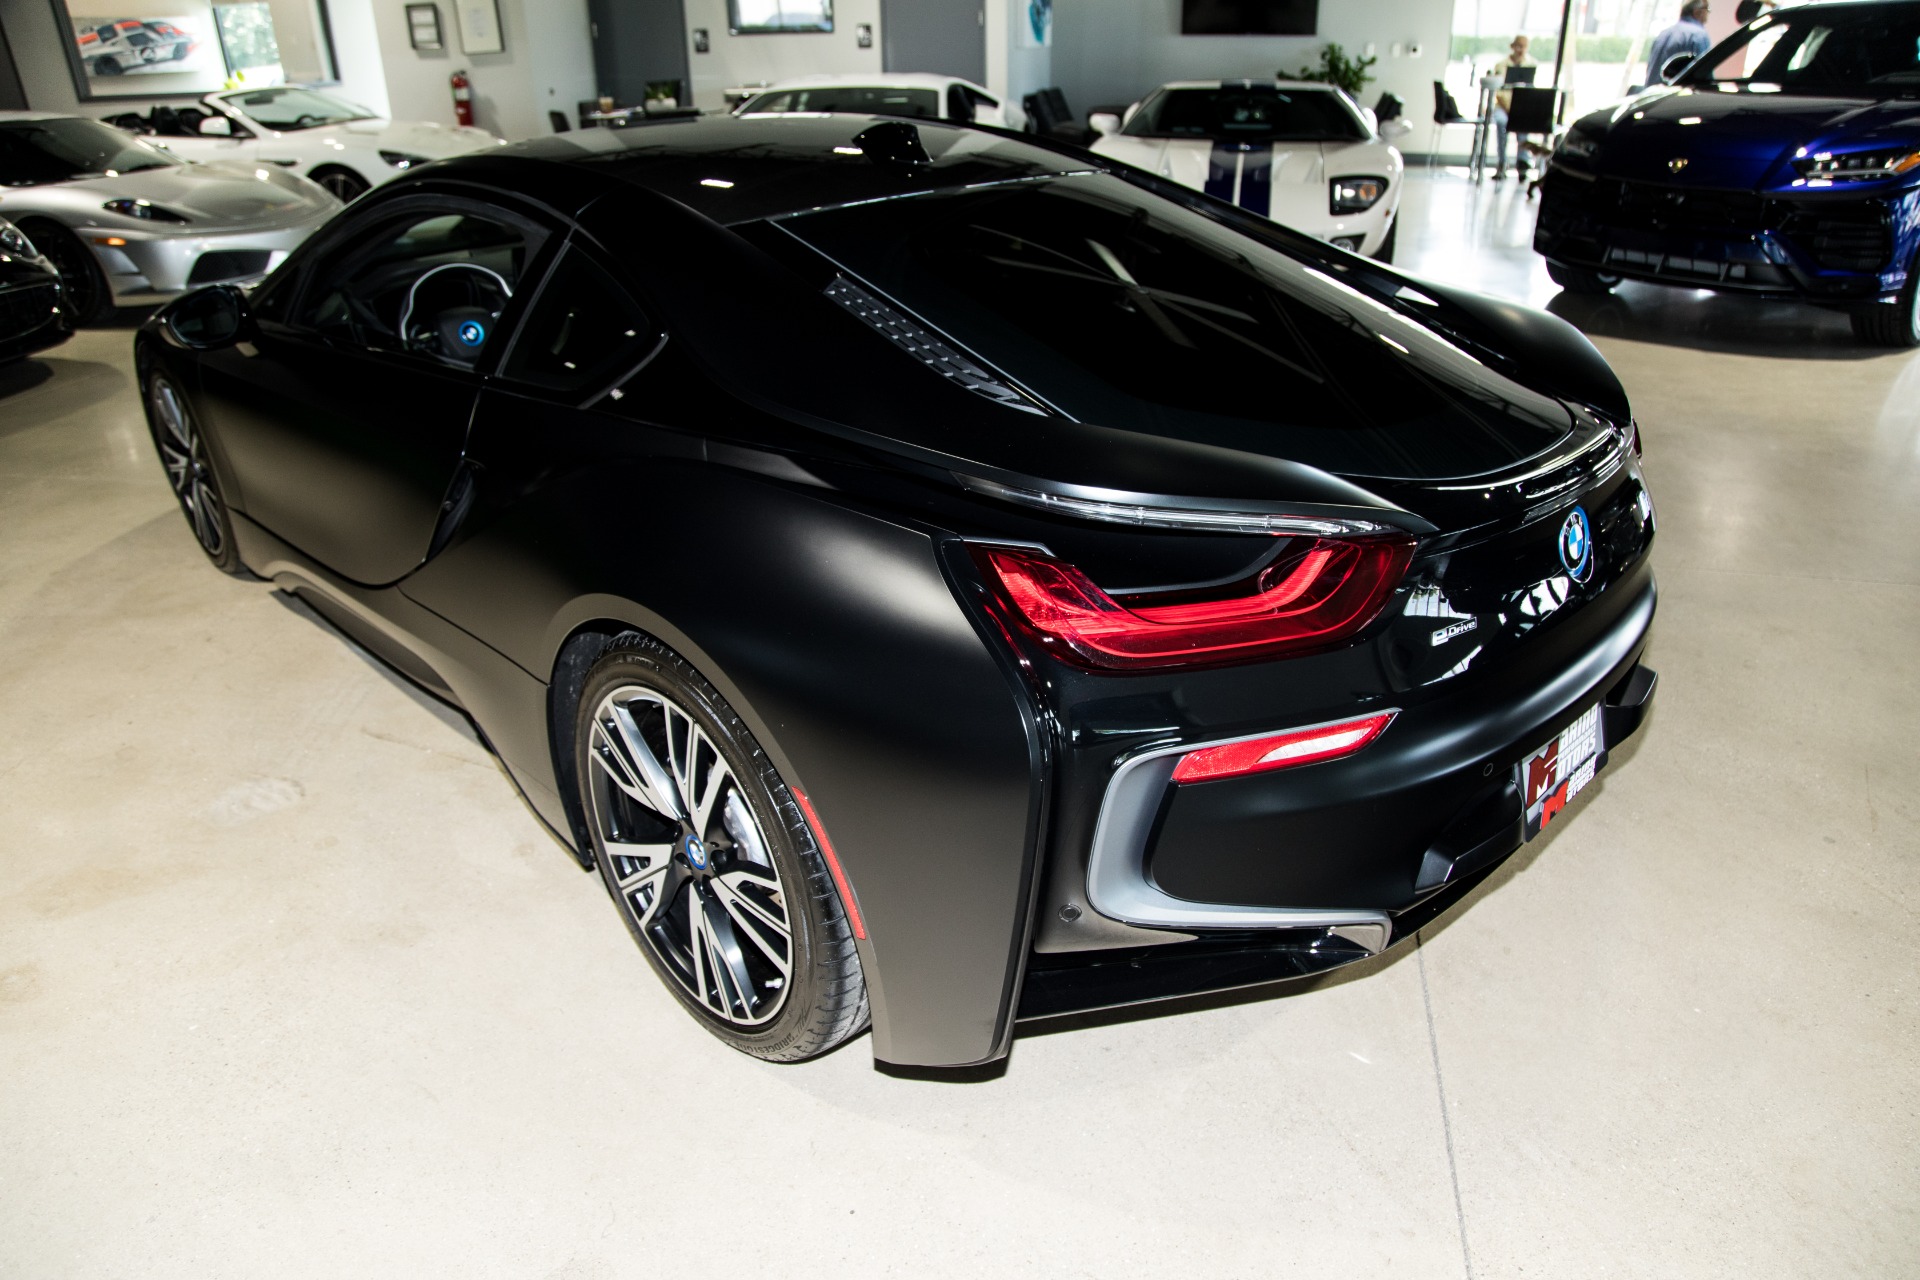 Used 2017 BMW i8 Protonic Frozen Black Edition For Sale ($87,500